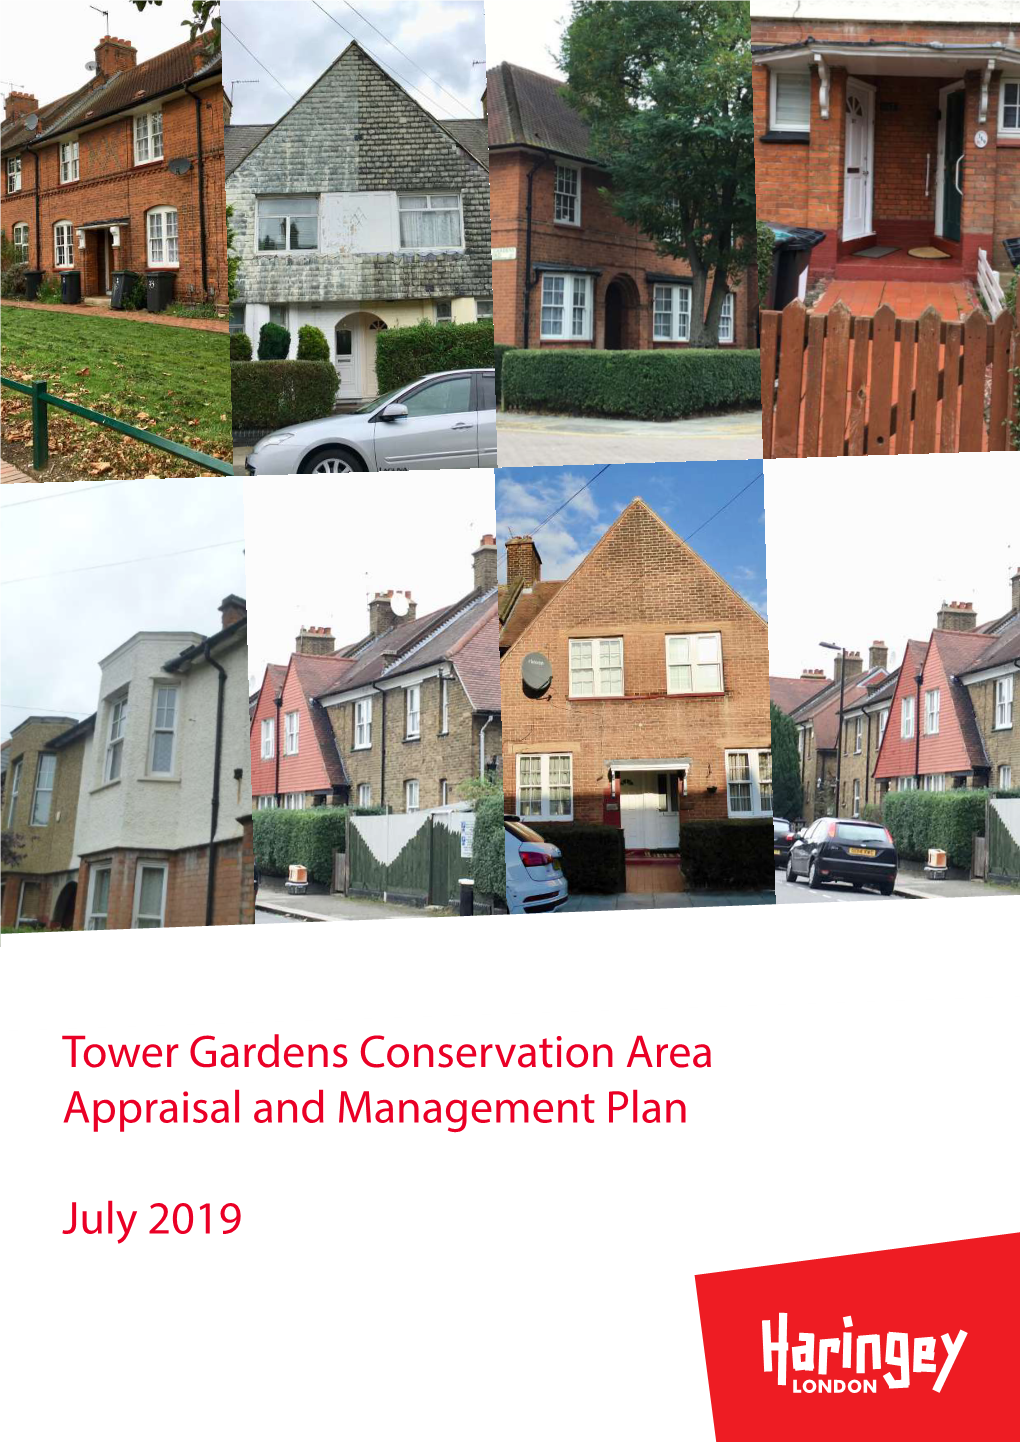 Tower Gardens Conservation Area Appraisal and Management Plan July 2019